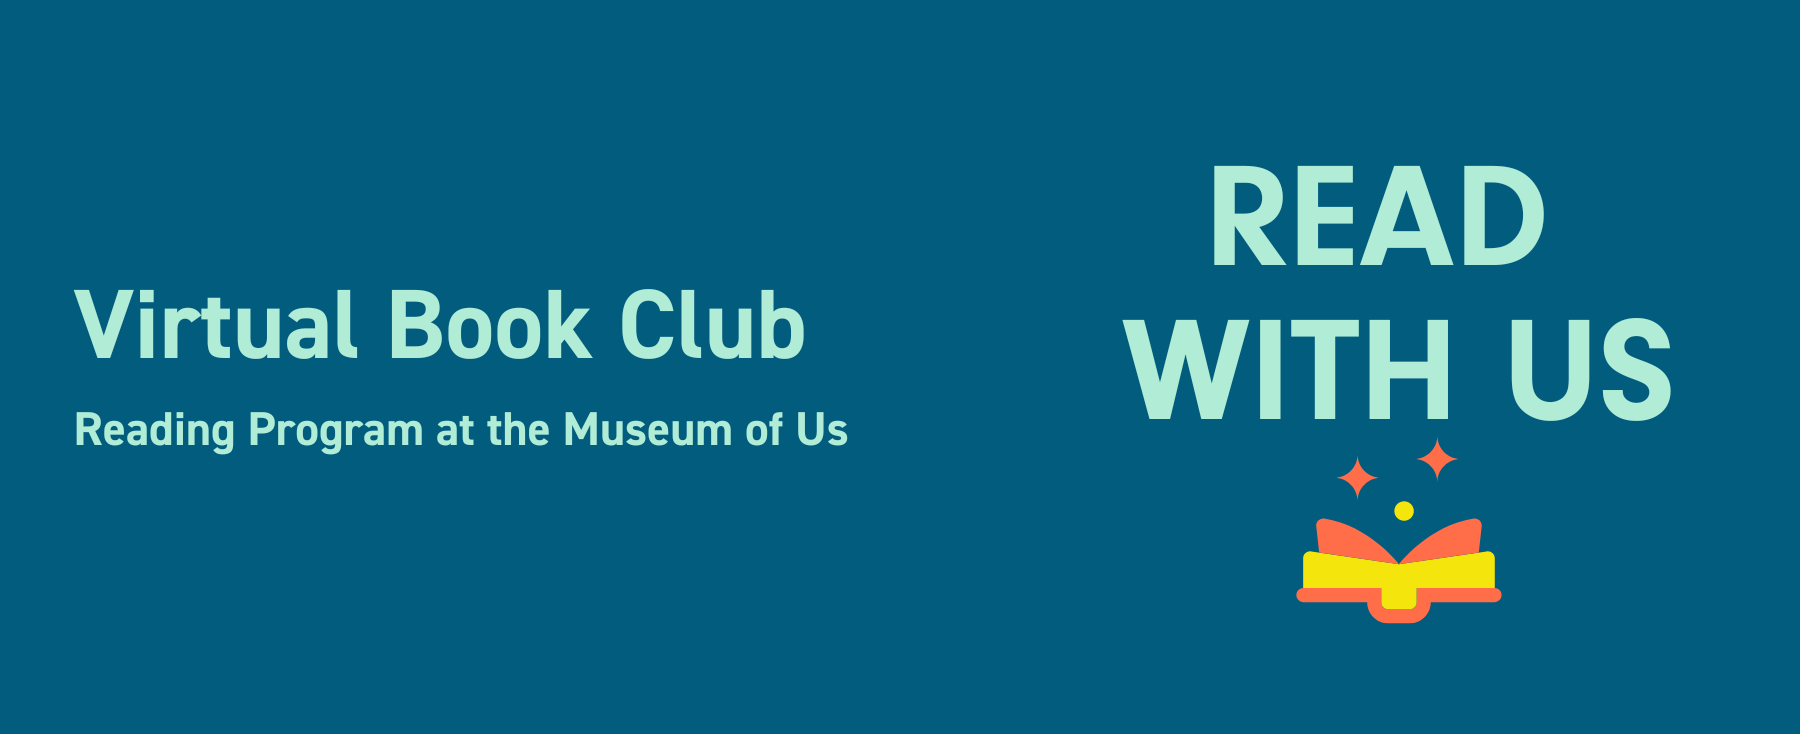 A graphic image on a dark blue background with light blue text that says Virtual Book Club Reading Program at the Museum of Us READ WITH US